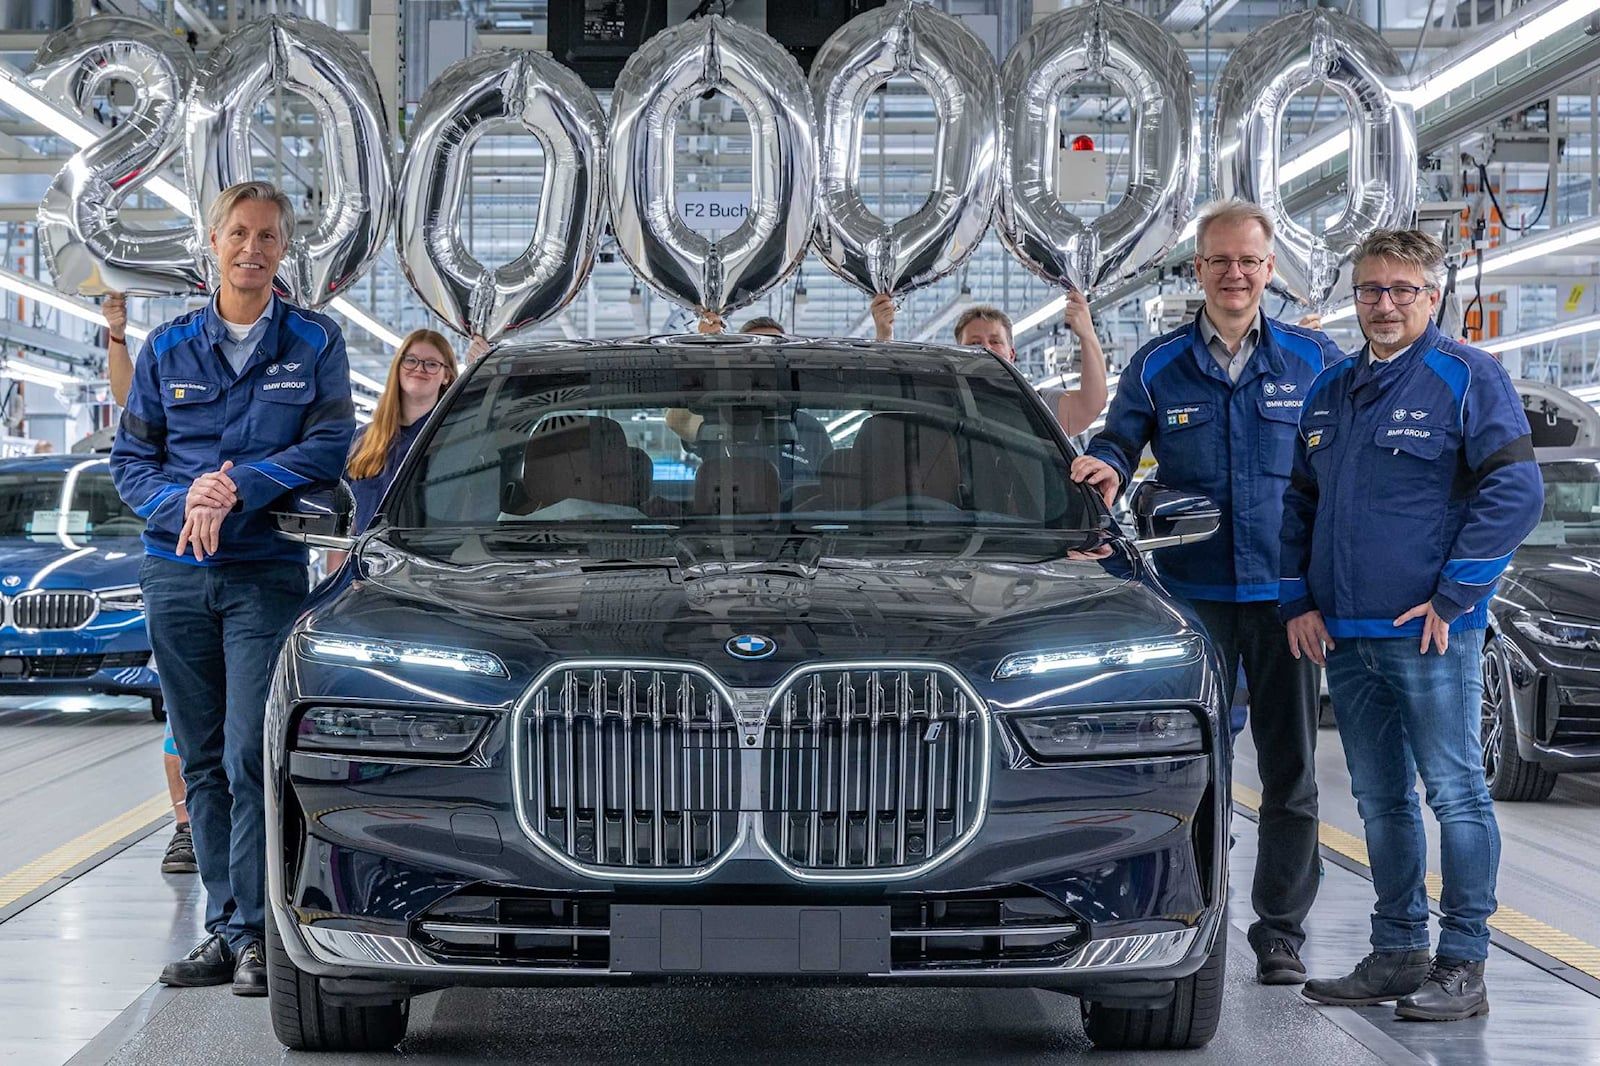 The two-millionth BMW 7 Series at their plant in Dingolfing